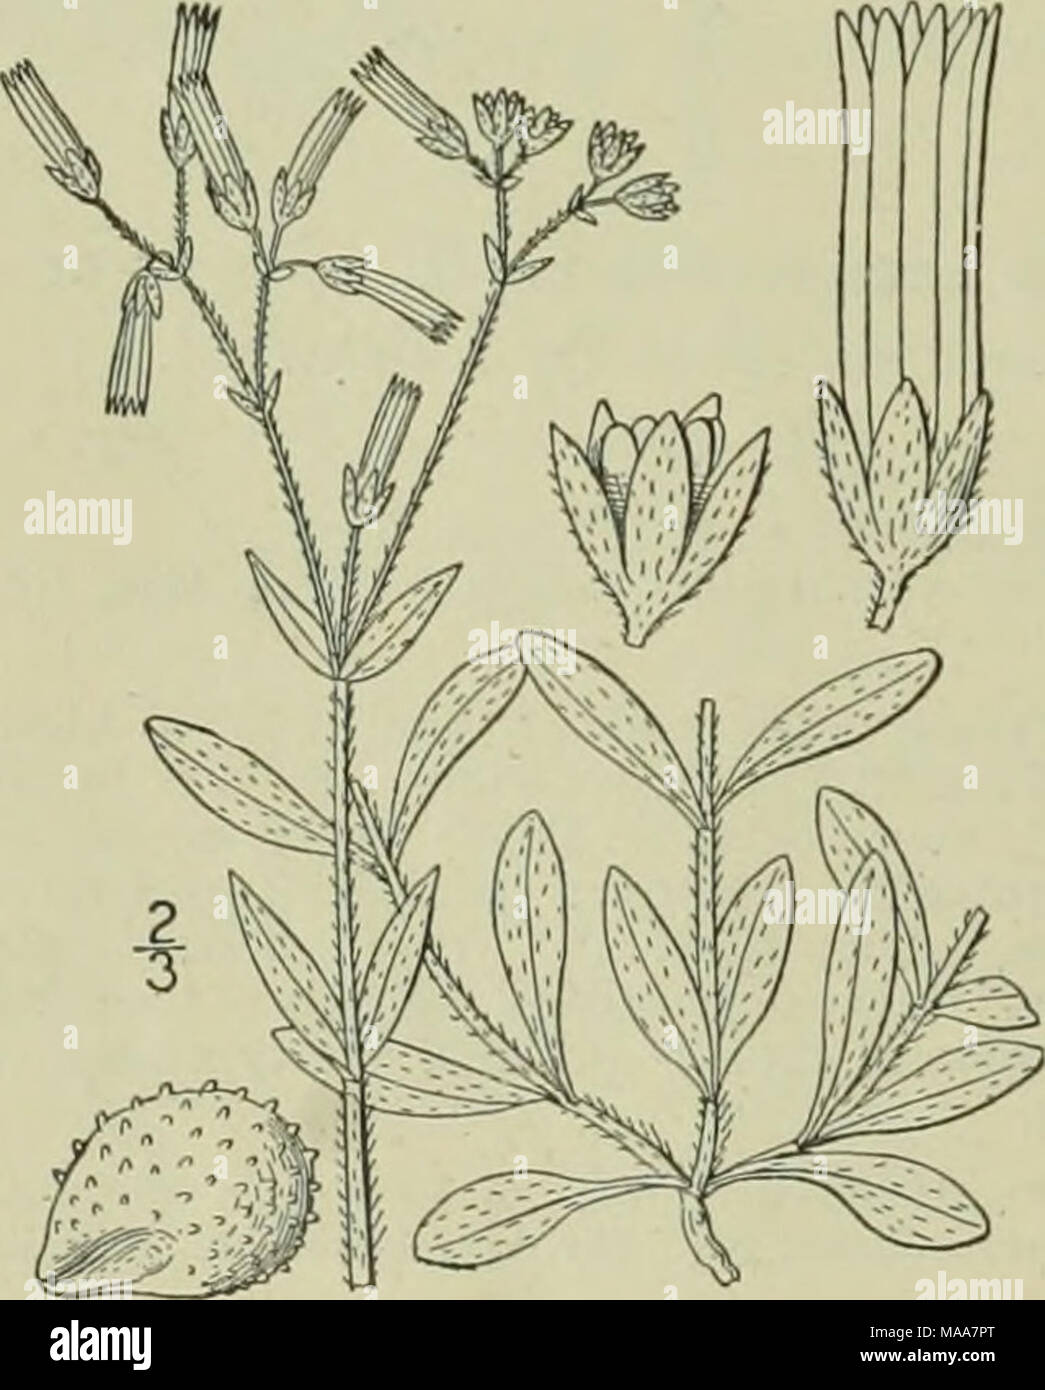 . An illustrated flora of the northern United States, Canada and the British possessions : from Newfoundland to the parallel of the southern boundary of Virginia and from the Atlantic Ocean westward to the 102nd meridian . 5. Cerastium brachypodum (Engelm.l Robinson. Short-stalked Chickweed. Fig. 1767. Cerastium nutans var. brachypodum Engelm. ; A. Gray. Man. Ed. 5, 94. 1867. Cerastium brachypodium Robinson ; Britton, Mem. Torr. Club 5: 150. 1894. Cerastium 'brachypodium compactum Robinson, Proc. Am. Acad. 29: 278. 1894. Annual, light green, viscid-pubescent or pu- berulent all over, stems tuf Stock Photo